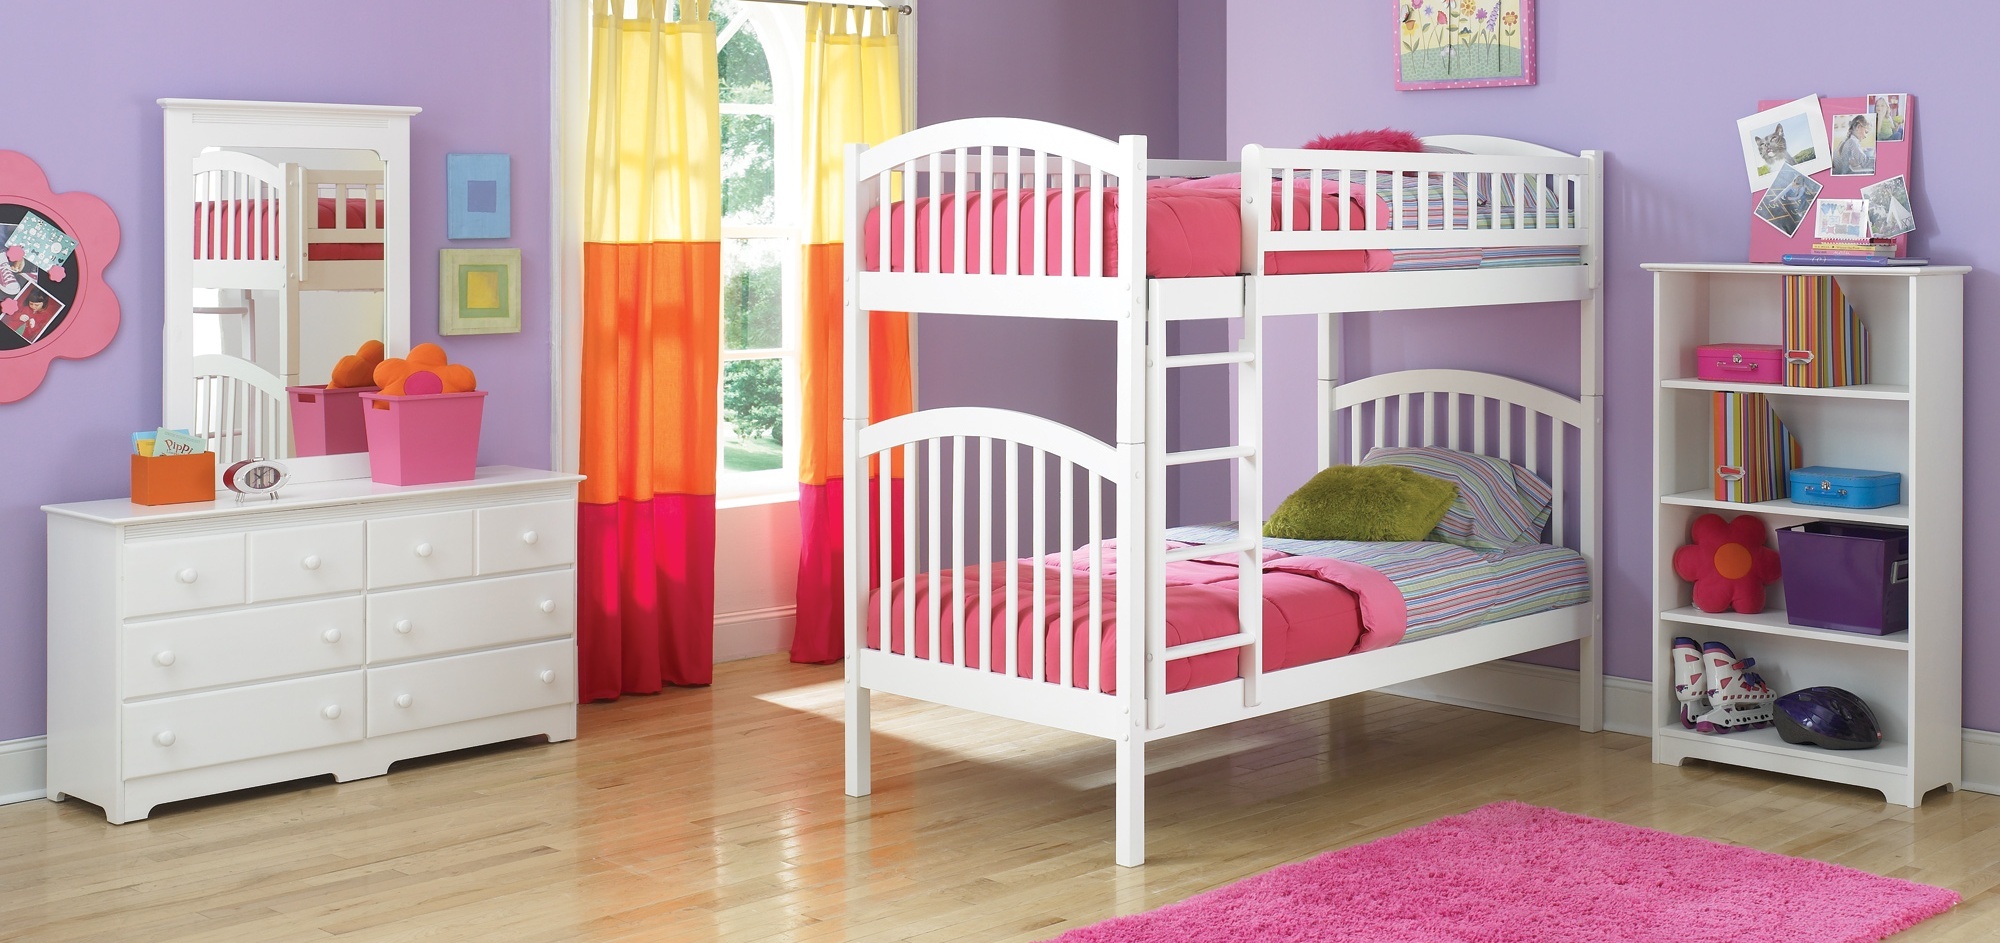 White Kids Color Stylish Pure White Kids Bedroom Sets Color Scheme Feats With Purple Wall Paint Ideas And Pink Fluffy Rug Bedroom Best Bedroom Colors For Kids Bedroom Set